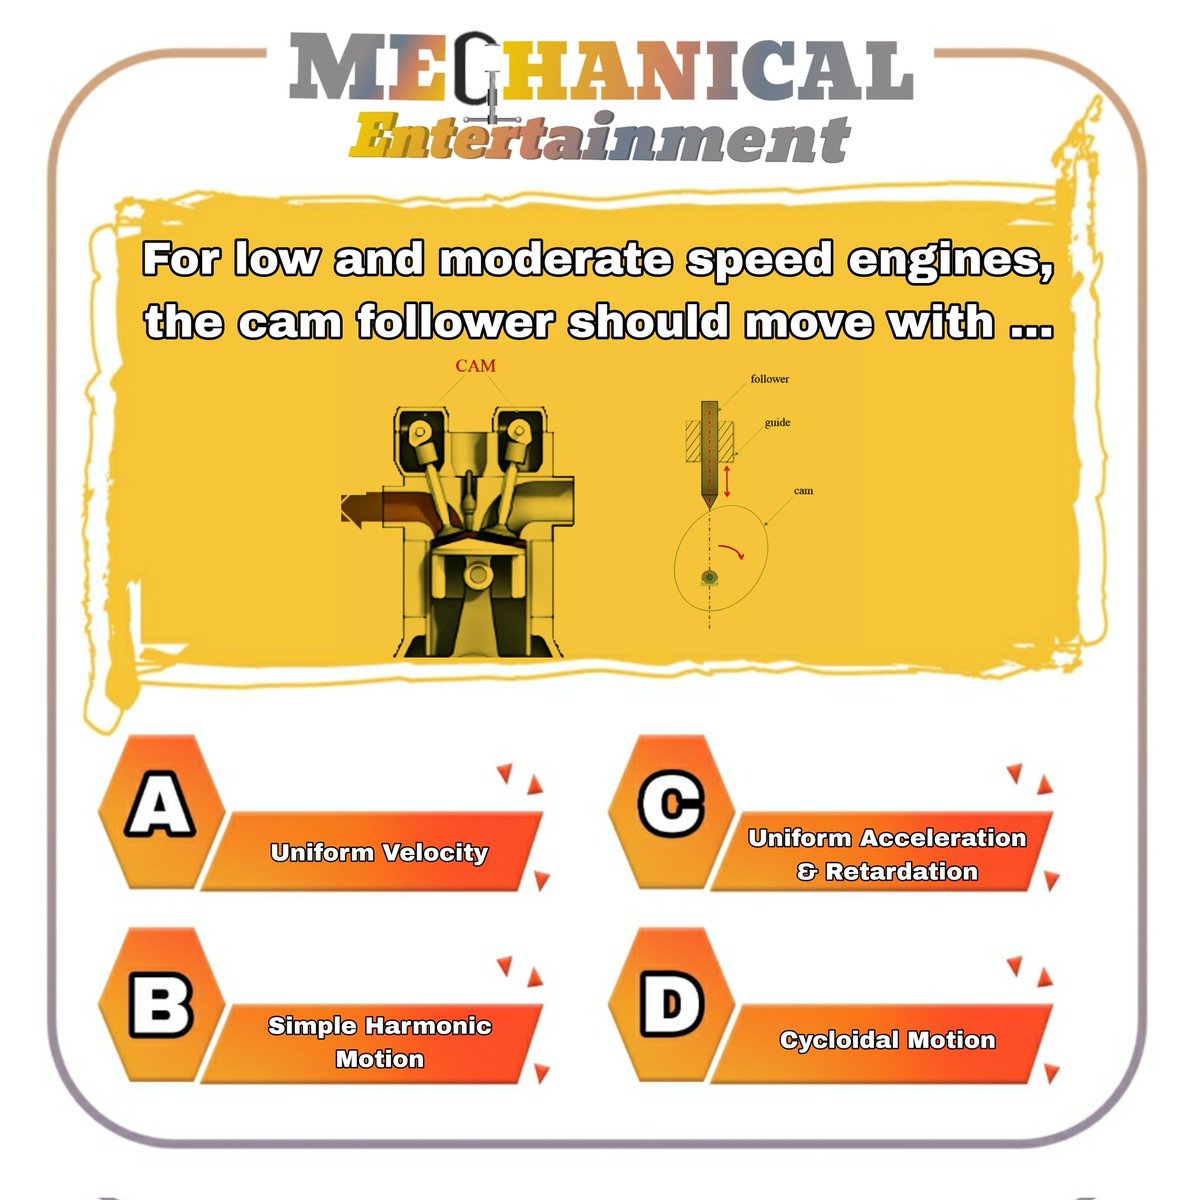 Test Your Mechanical Knowledge
Comment Answer Below,

#mechanicalentertainment #kunalmendhe  #engineeringmcq #mcq  #mechanicalquiz #mechanicalstudent #design #designengineering #designengineer #theoryofmachines #tom #engine #camandfollower #cam